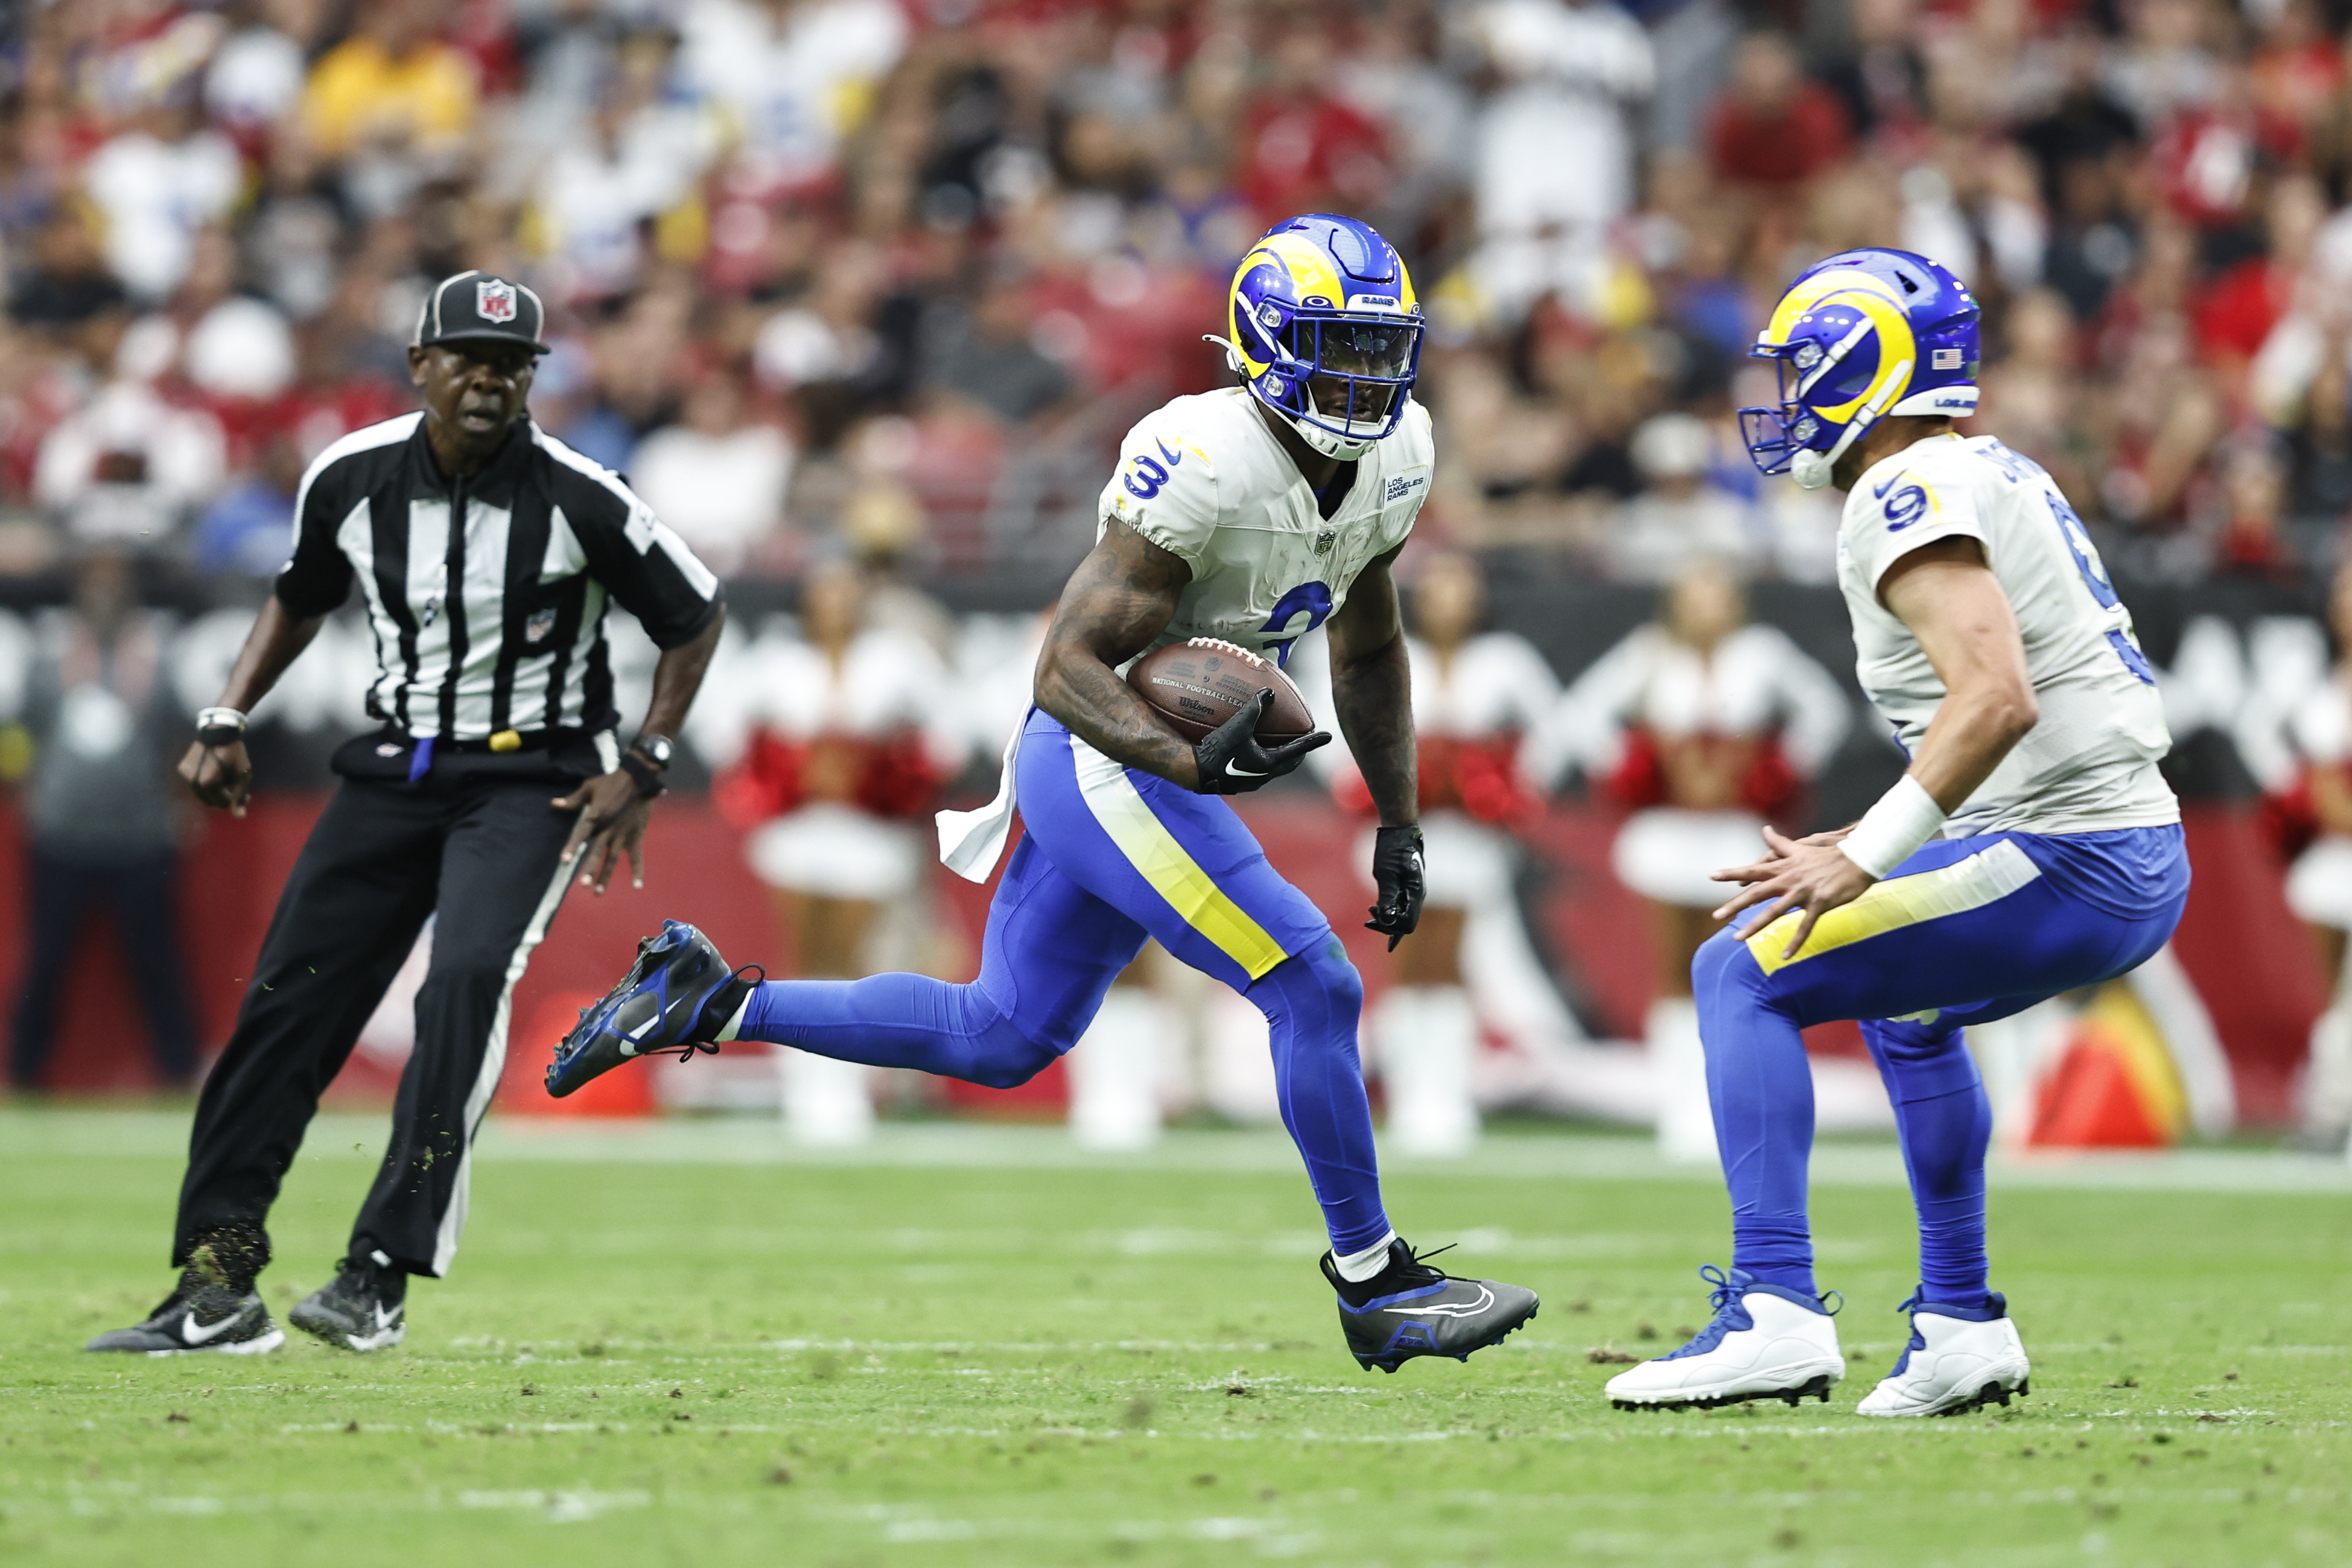 Cam Akers #3 of the Los Angeles Rams runs during an NFL football game between the Arizona Cardinals and the Los Angeles Rams at State Farm Stadium on September 25, 2022 in Glendale, Arizona. The Los Angeles Rams won 20-12.